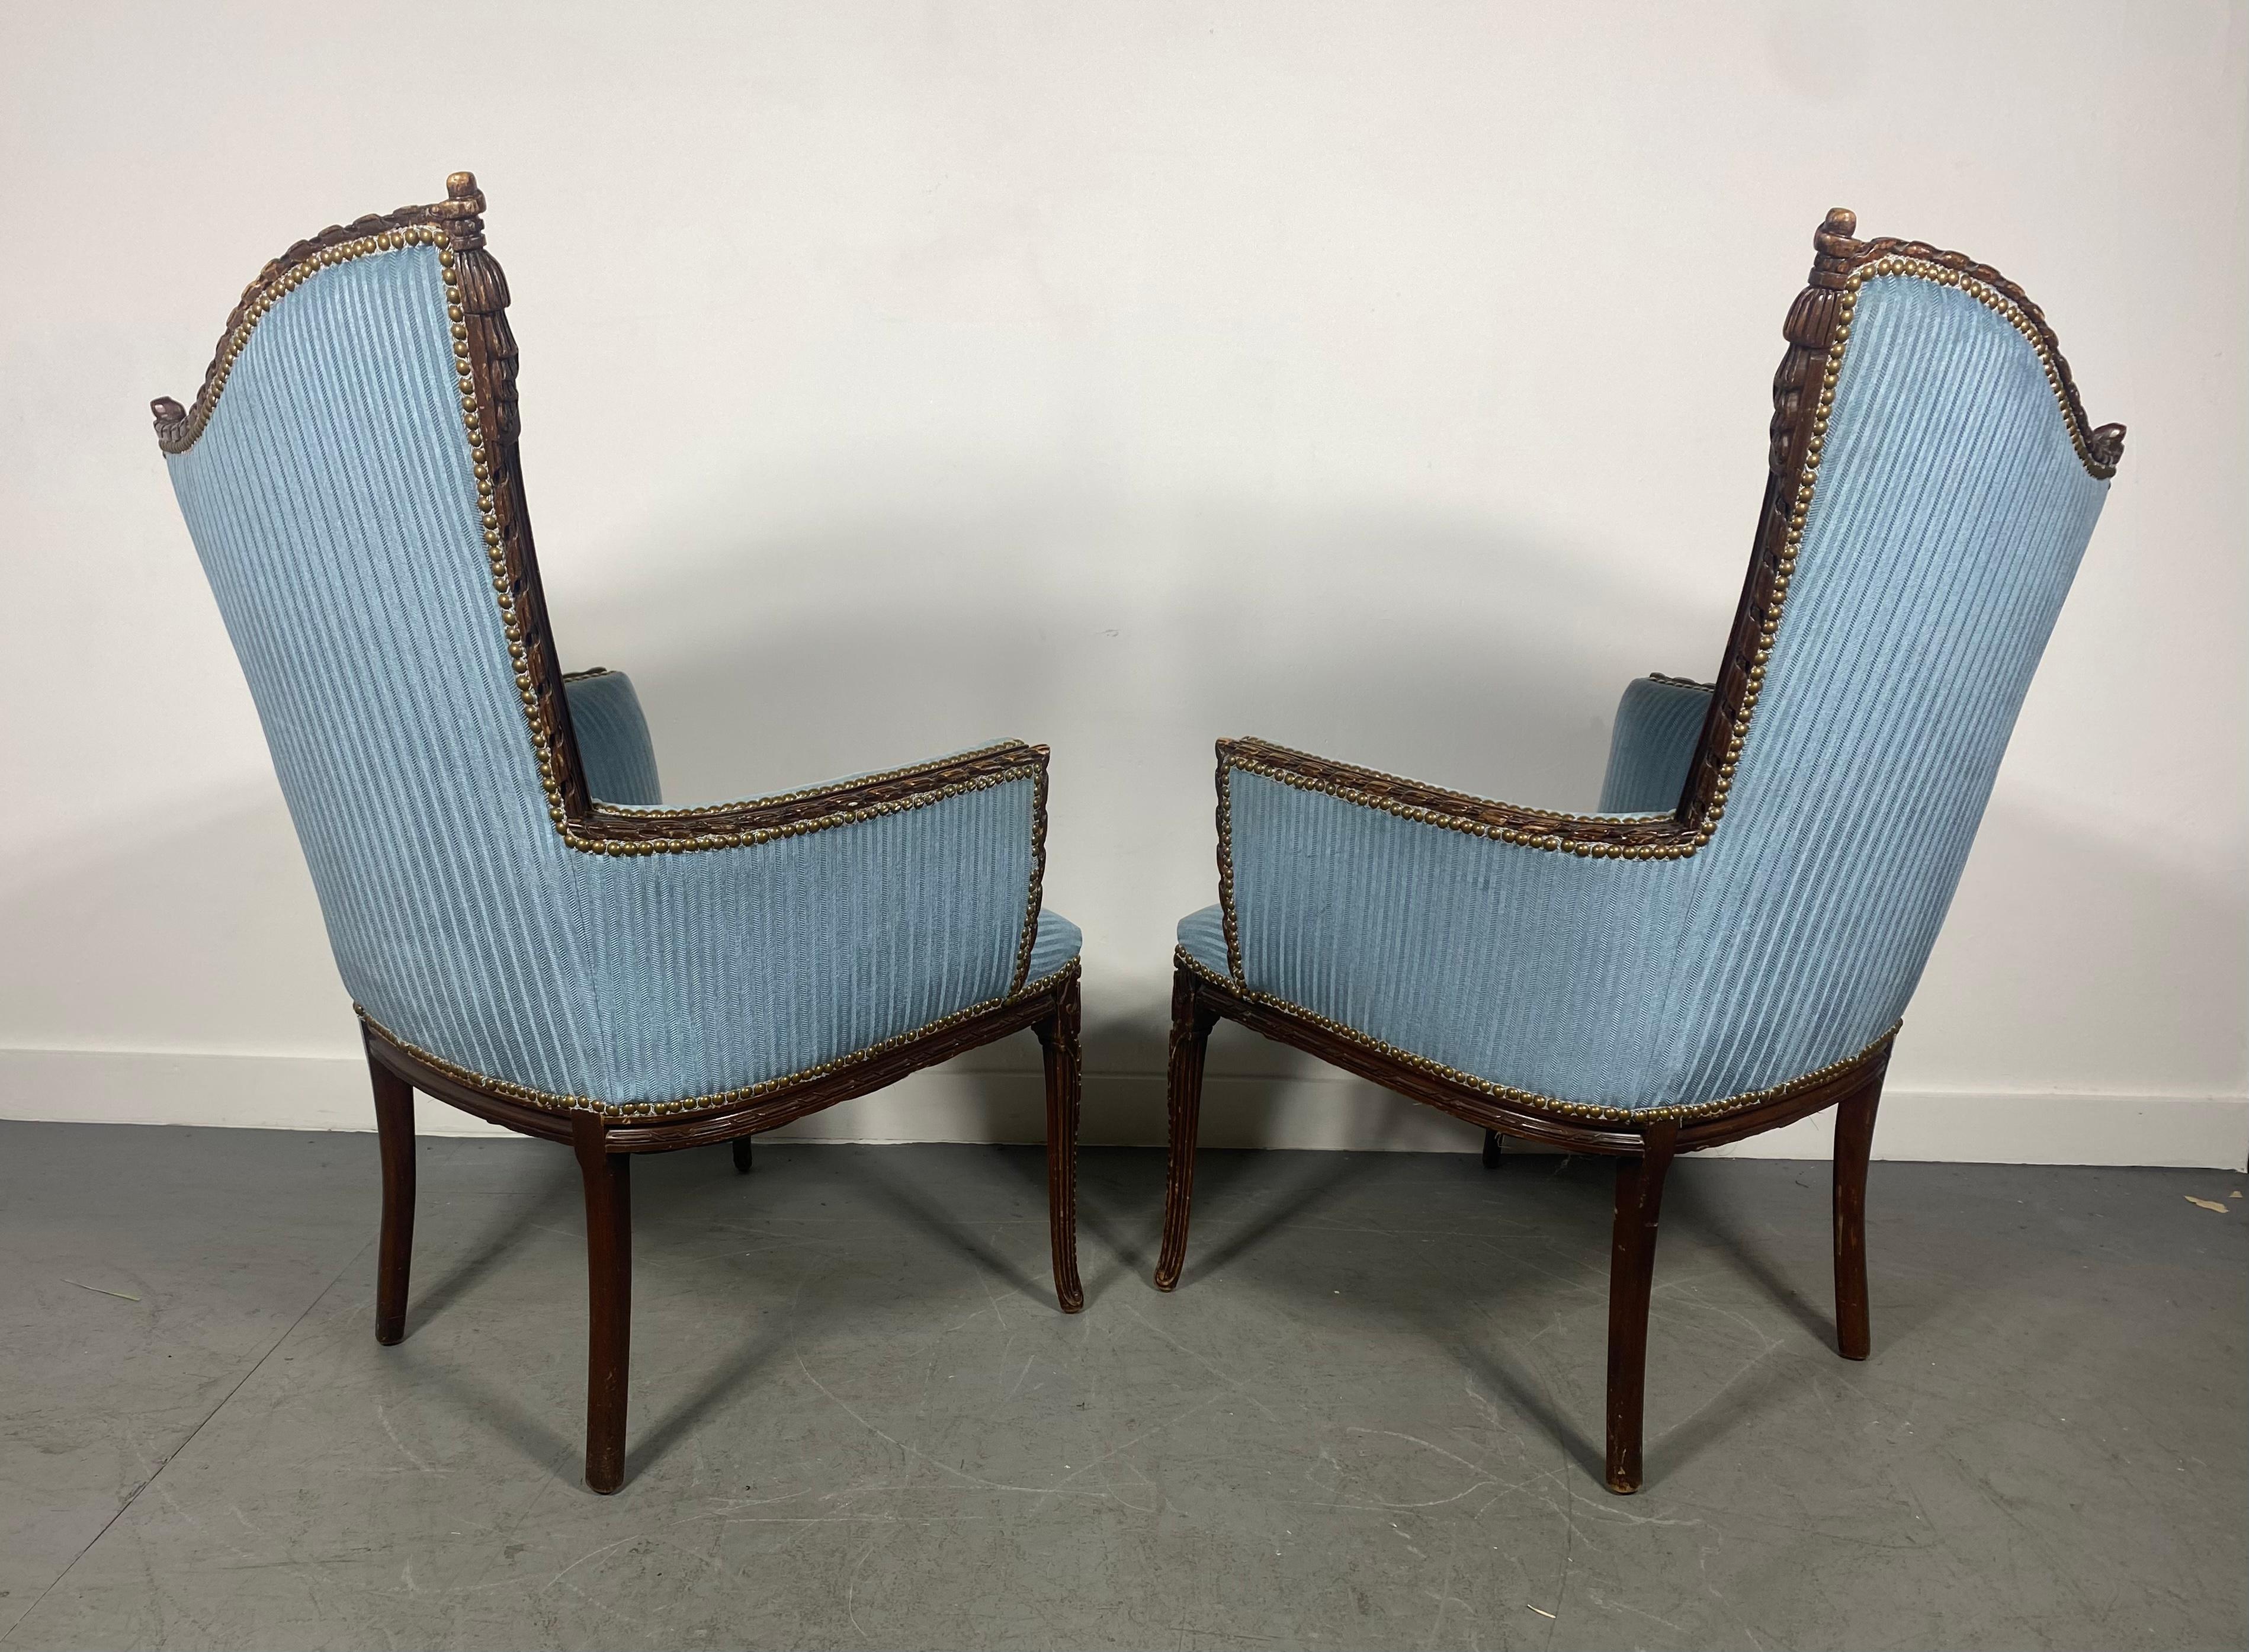 High style pair of arm, lounge chairs by the Grosfeld House Furniture Company. The chairs feature hand carved wood frames with decorative tassels etc.Age appropriate wear to wood, Glamorous and chic design, nice condition, recently reupholstered.